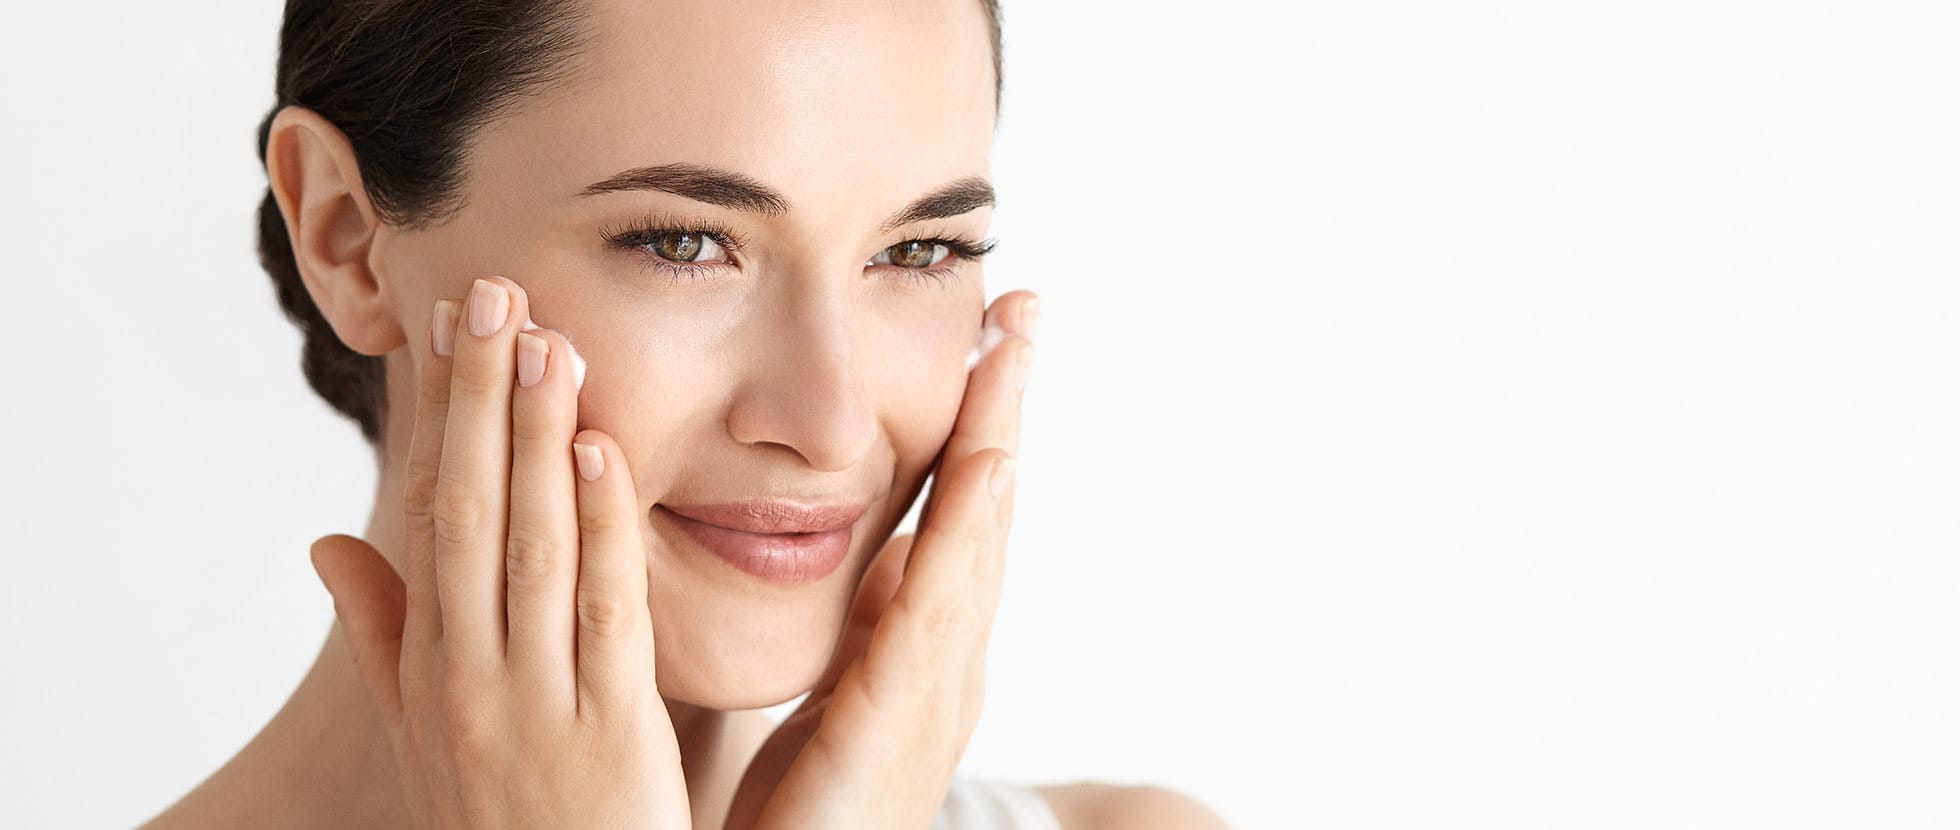 Skin aging: the signs of aging and the skin aging process